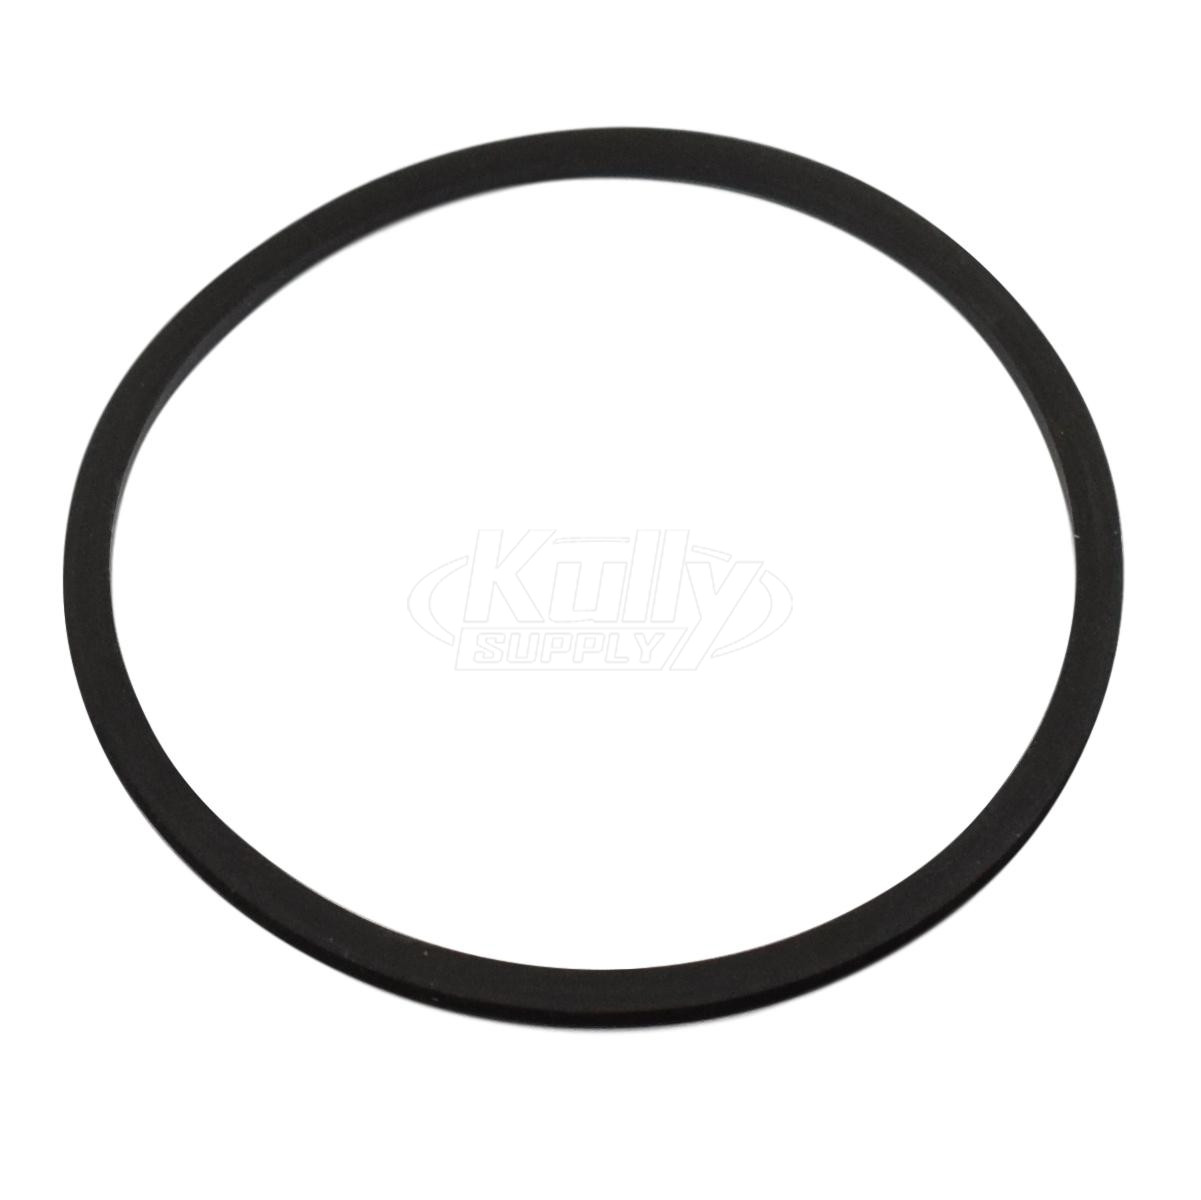 Zurn P6200-LL-CG Cover Gasket (for Z6200 Series)